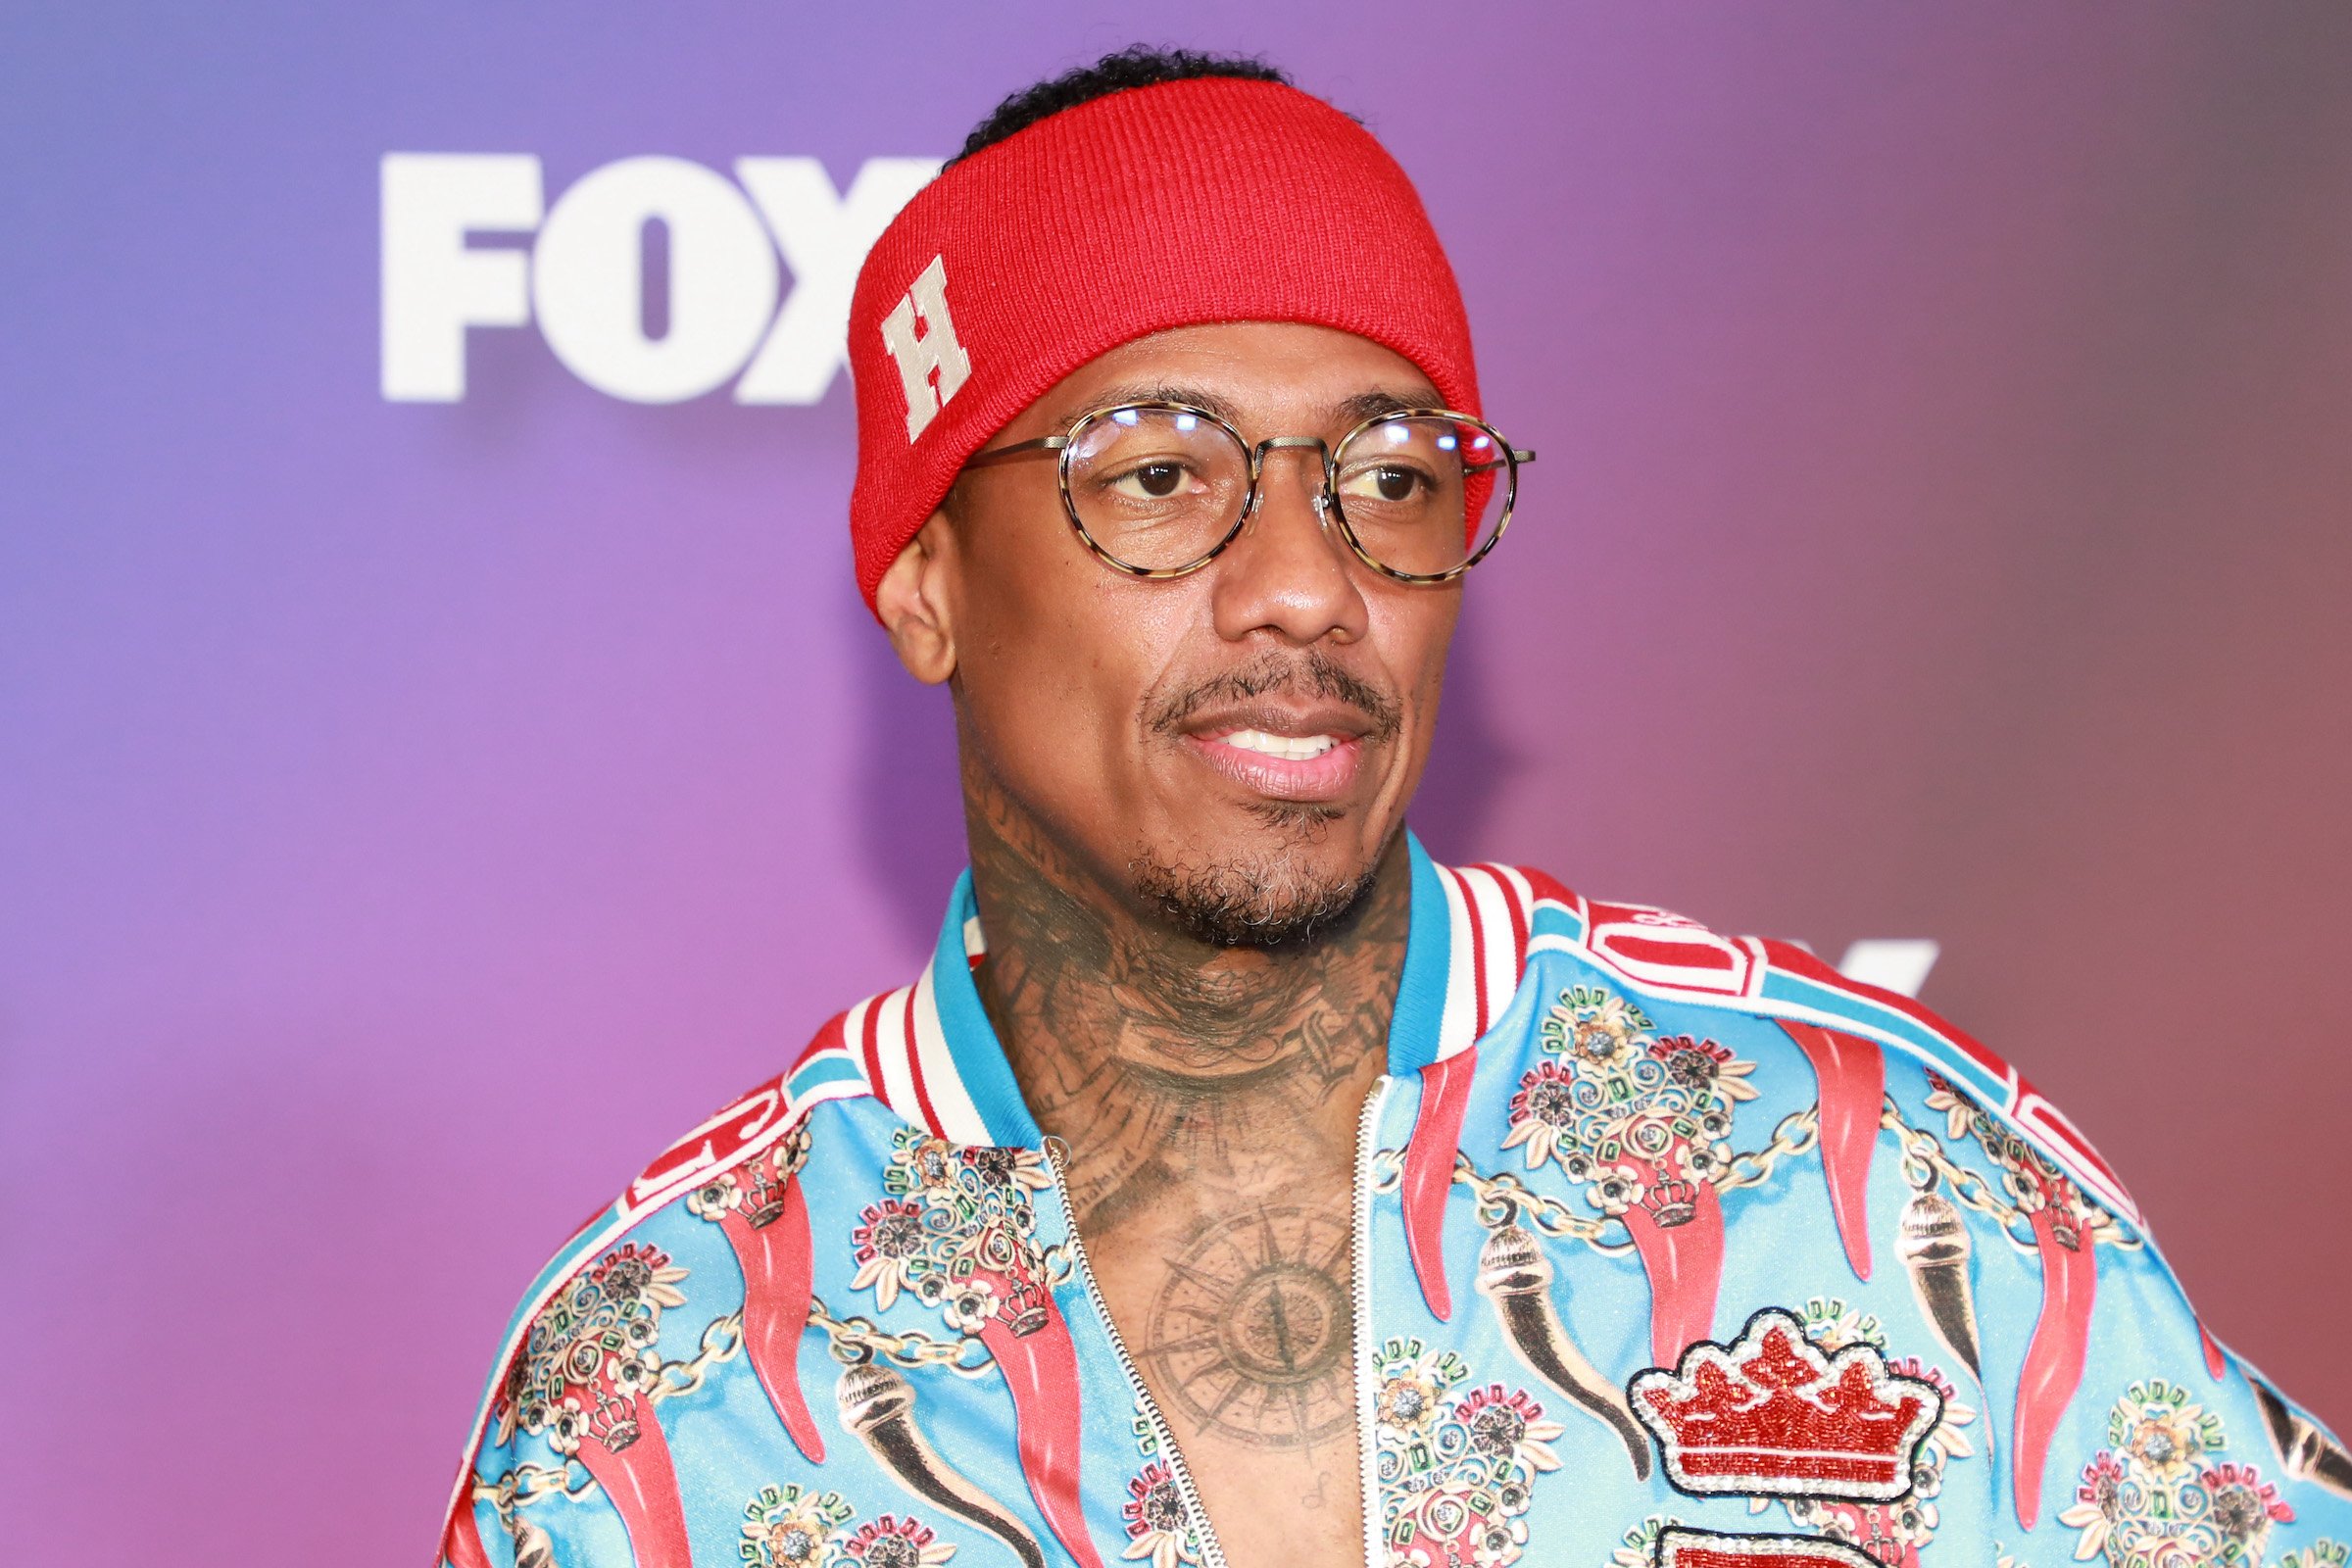 Vasectomy candidate Nick Cannon wearing a red headband and blue shirt